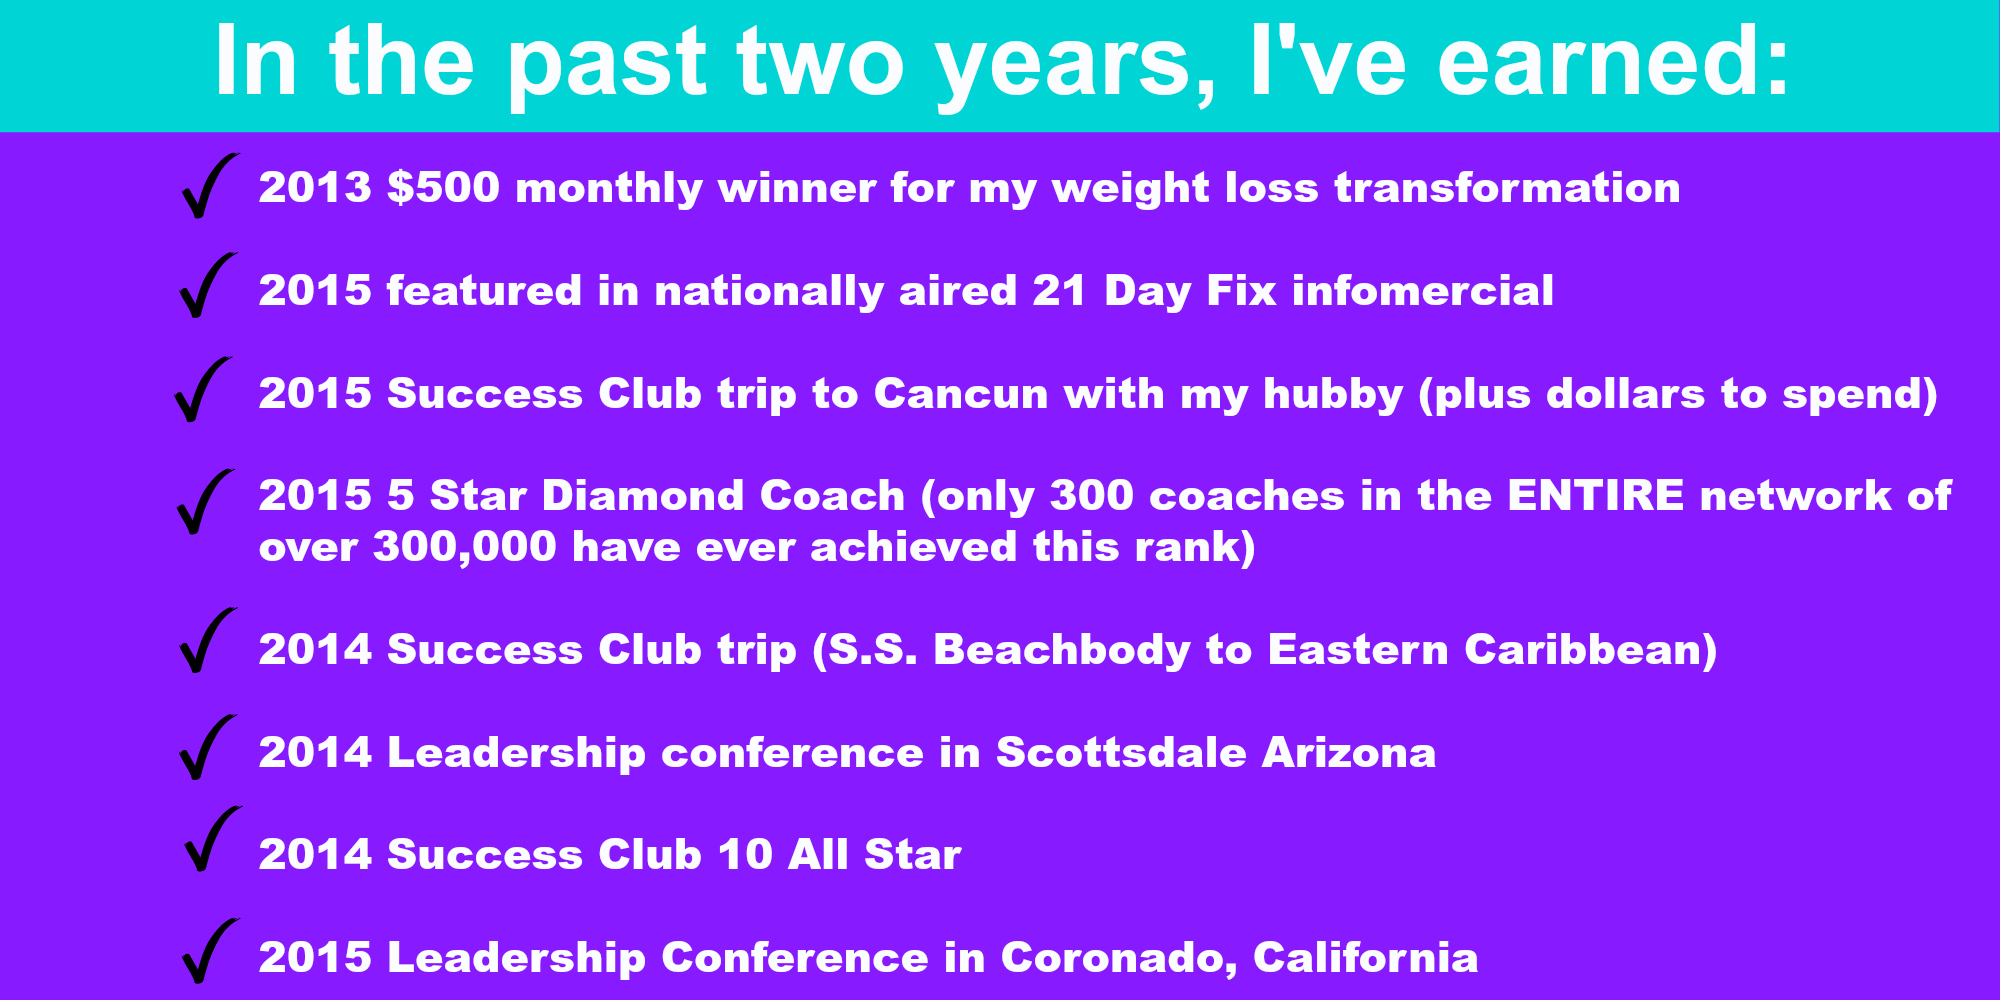 in the past two years I've earned